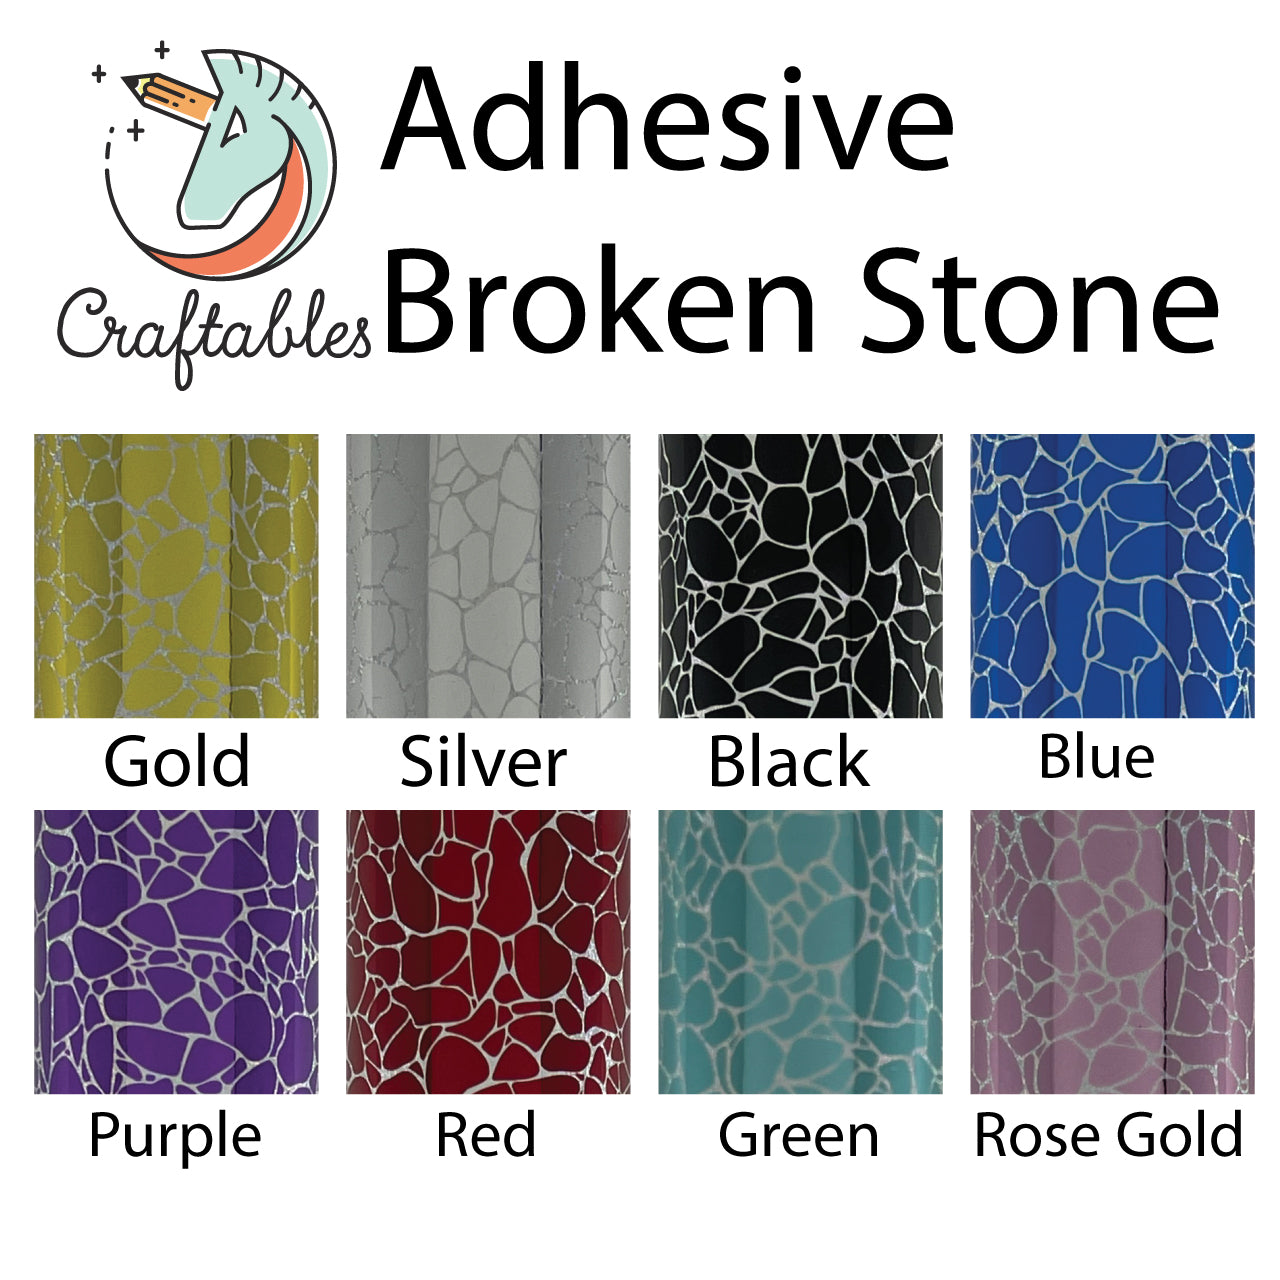 Silver Broken Stone Holographic Adhesive Vinyl Rolls By Craftables